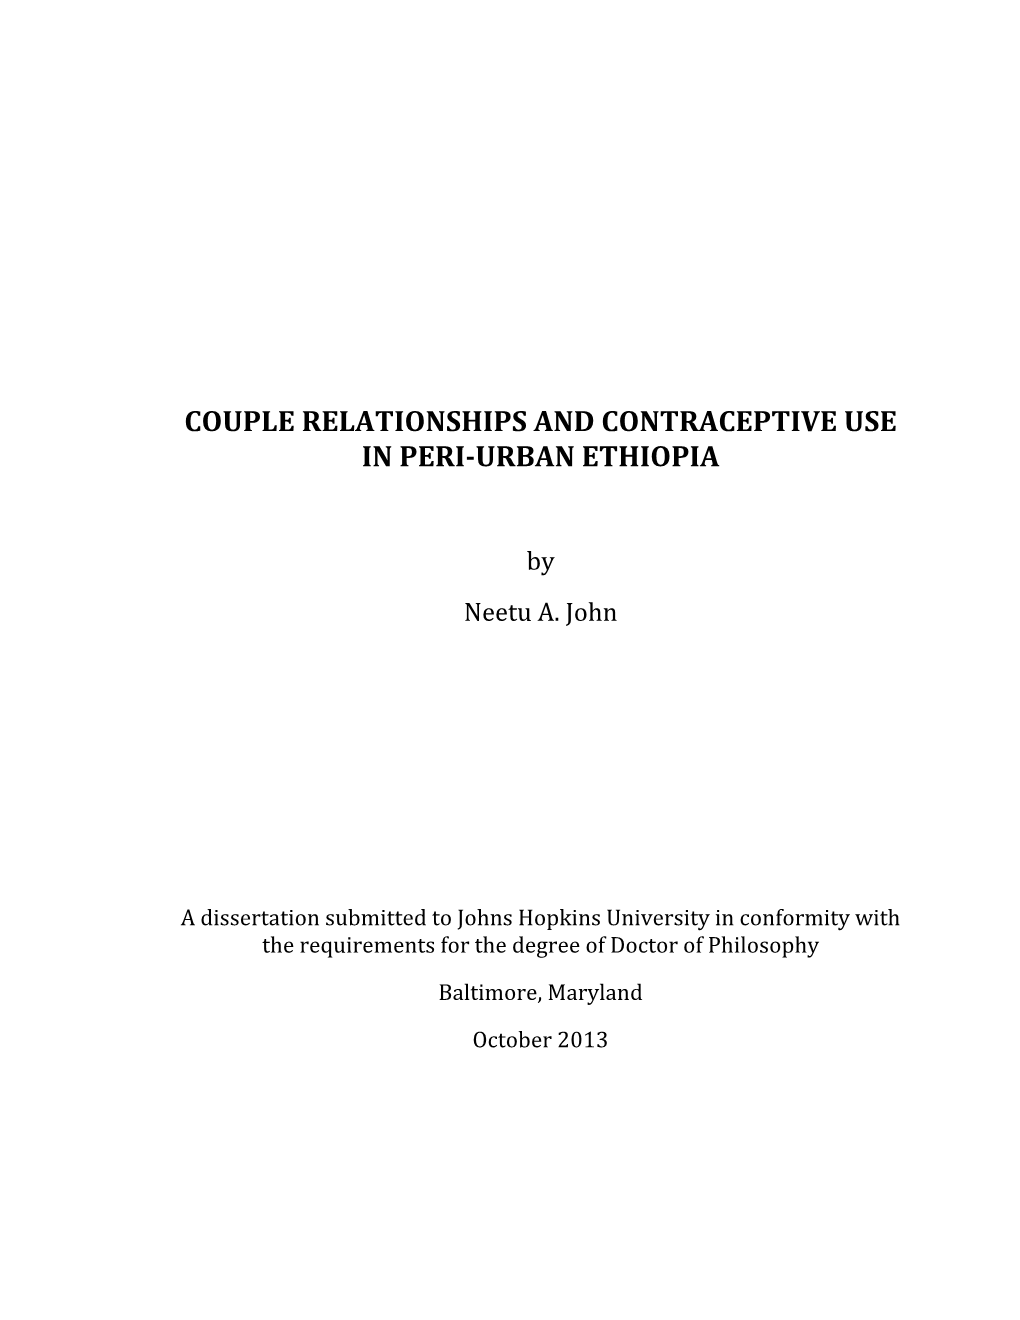 Couple Relationships and Contraceptive Use in Peri-Urban Ethiopia